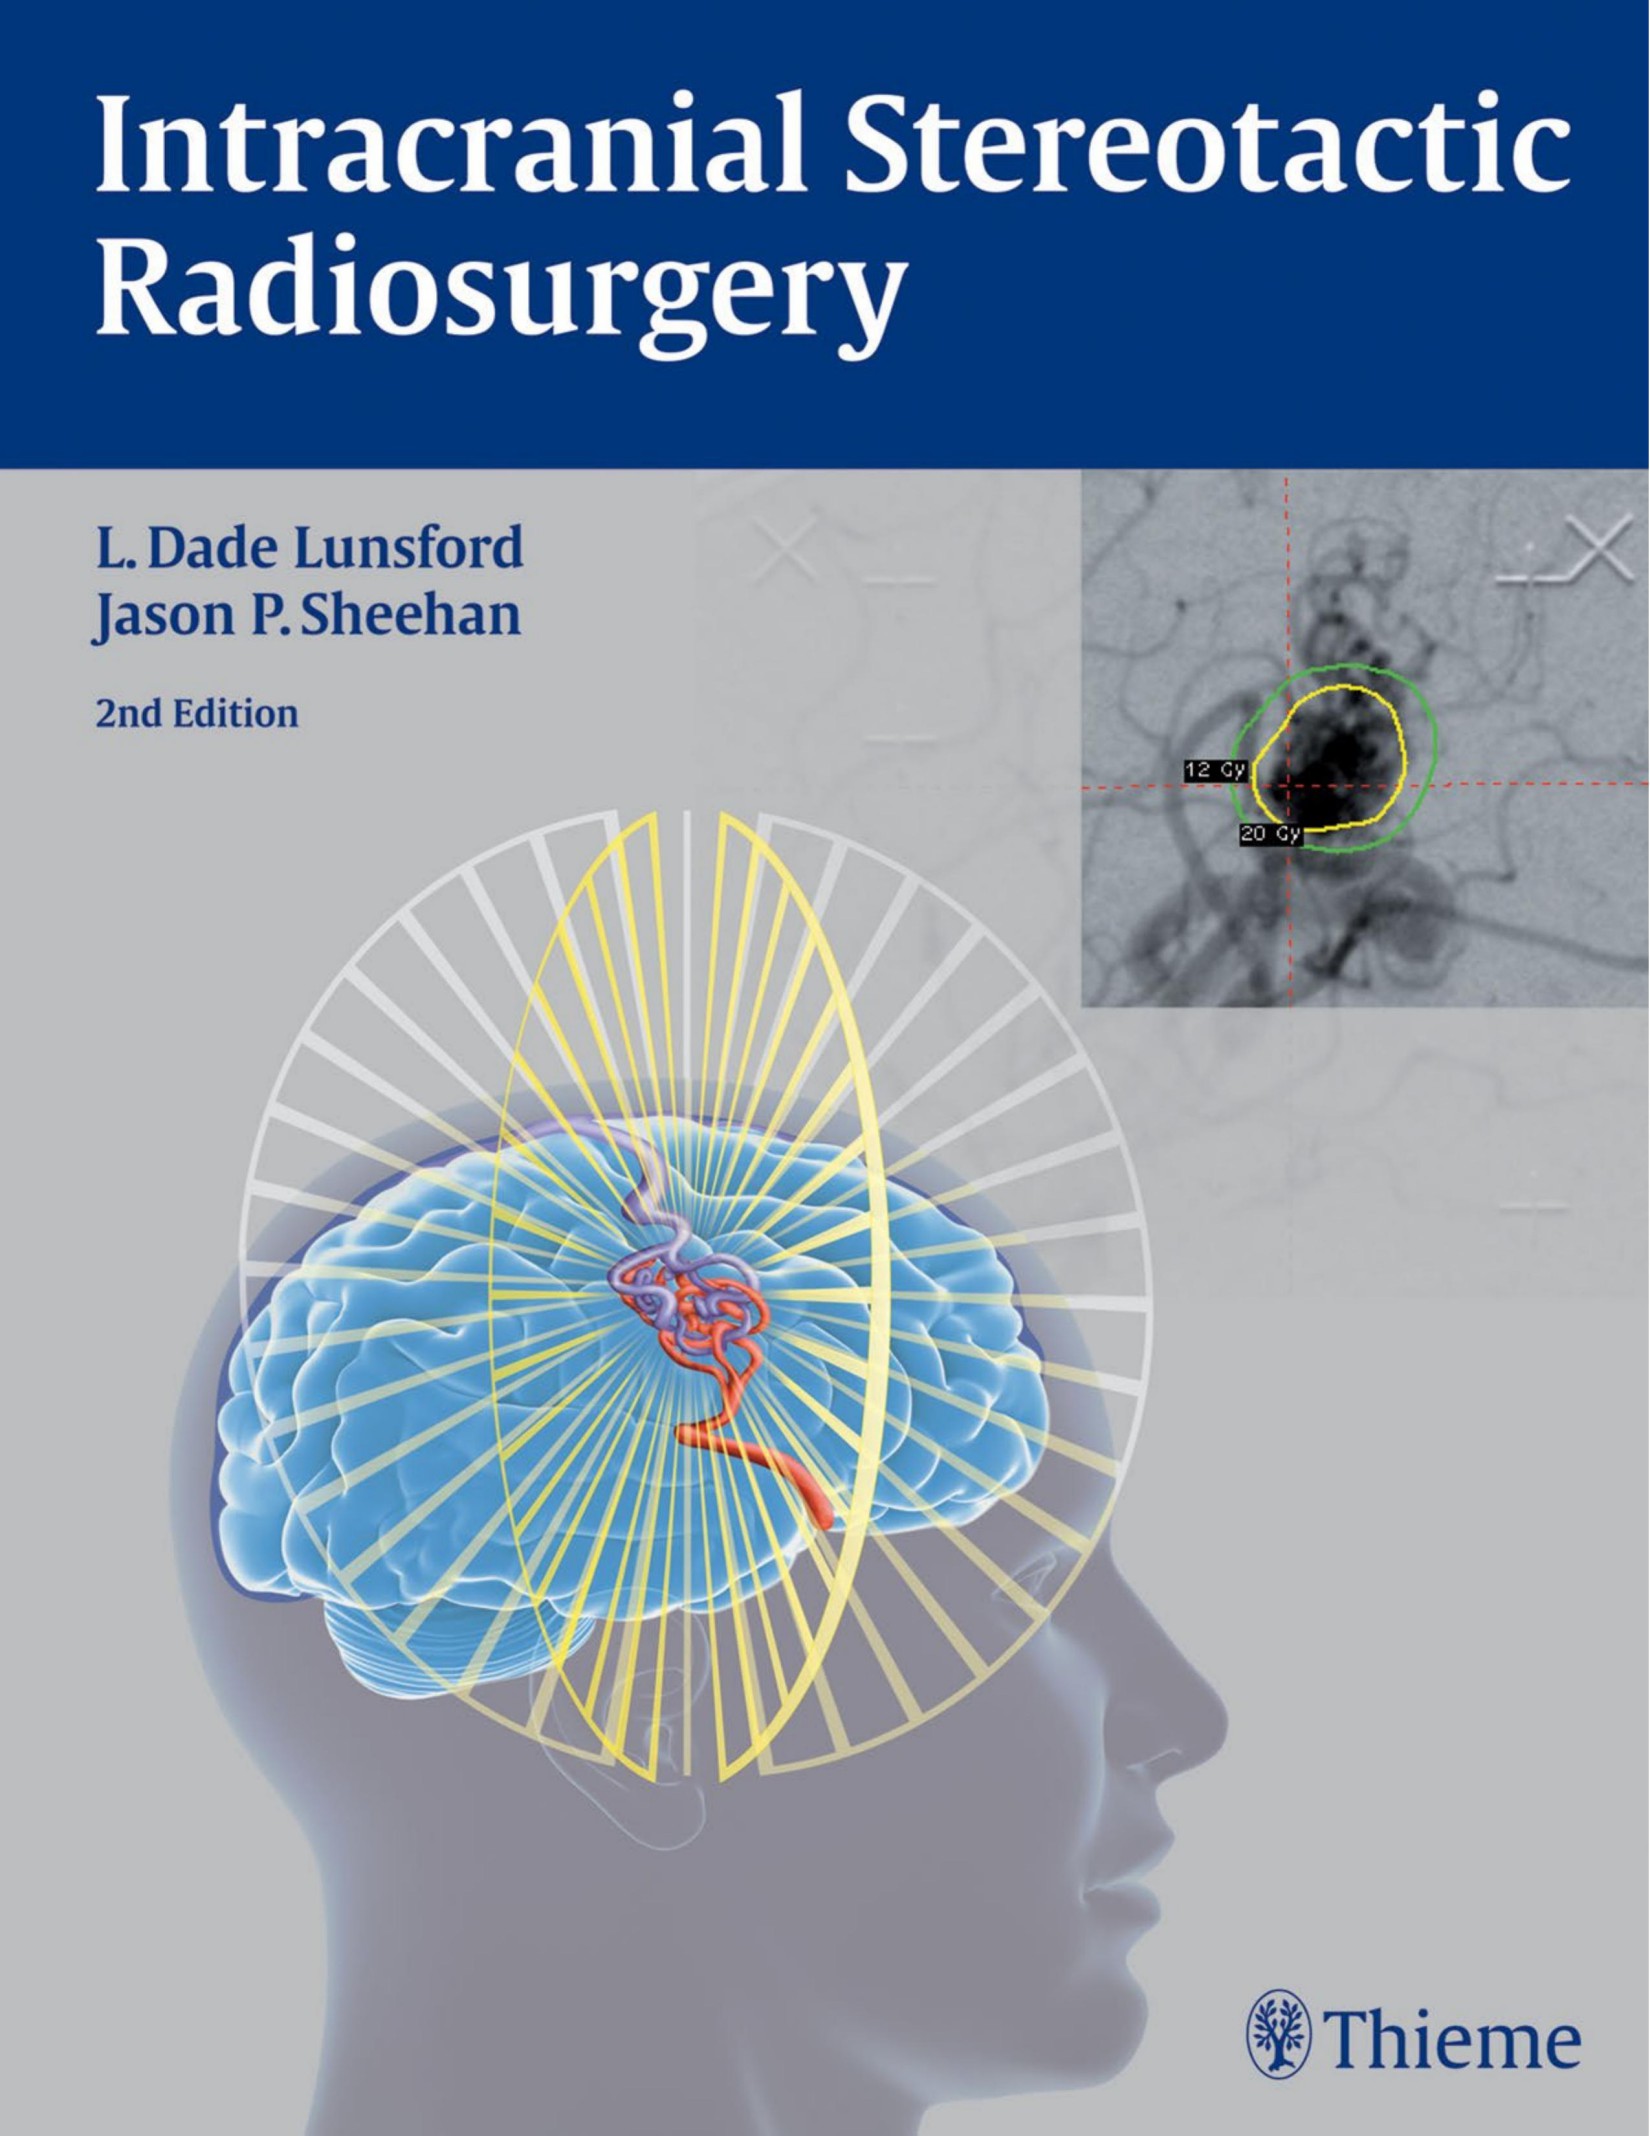 Intracranial Stereotactic Radiosurgery 2nd Edition.jpg